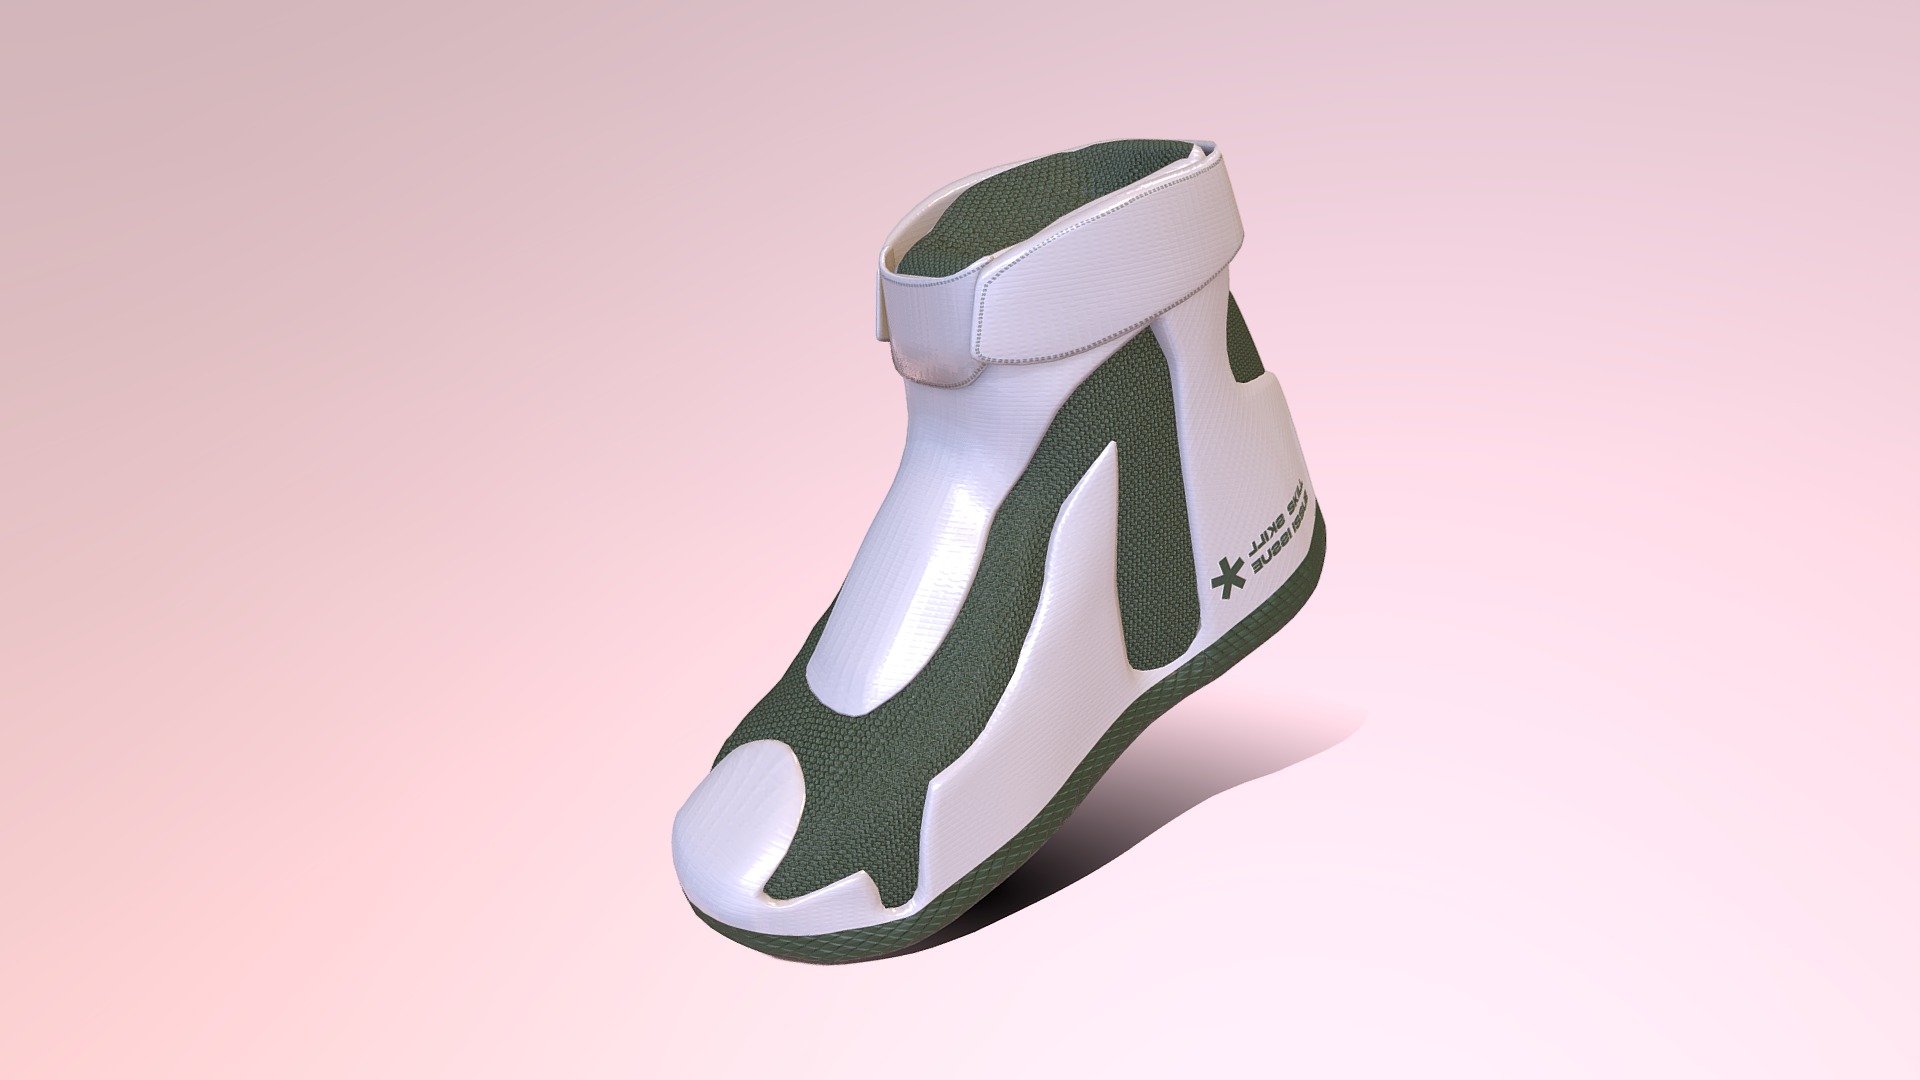 Well, well, well … it’s this time of the year. I’m very happy to present to you my NEW 3D Asset, the SPLIT MODERN SNEAKERS. Done entirely from scratch with 4 DIFFERENT COLOR VARIANTS.

AVAILABLE FOR ONLY 3.99$ ON MY GUMROAD

Split Sneakers were modelled and rigged to fit the very popular Pandabear female base.
They contain a Single Material with 4 x 4K Color Variants prepared for it.

Made in Blender and textured in Substance Painter by me Mosti#5334.
Rigged and weightpainted with the help of Zeit#9150 (yet again).

.zip includes FBX and textures.

***Specifications: ***

Size: 151 MB
Materials: 1
Verticies: 7,884
Edges: 15,184
Faces: 7,306
Polygons: 14,792

***Rules: ***

-Allowed to re-sell on packages and upload models (with credit)
-This is both a commercial and private license.
-Allowed to use this on public avatars.
-Don't post this as a nitro asset on discord.
-Don't resell, or claim as your own 3d model